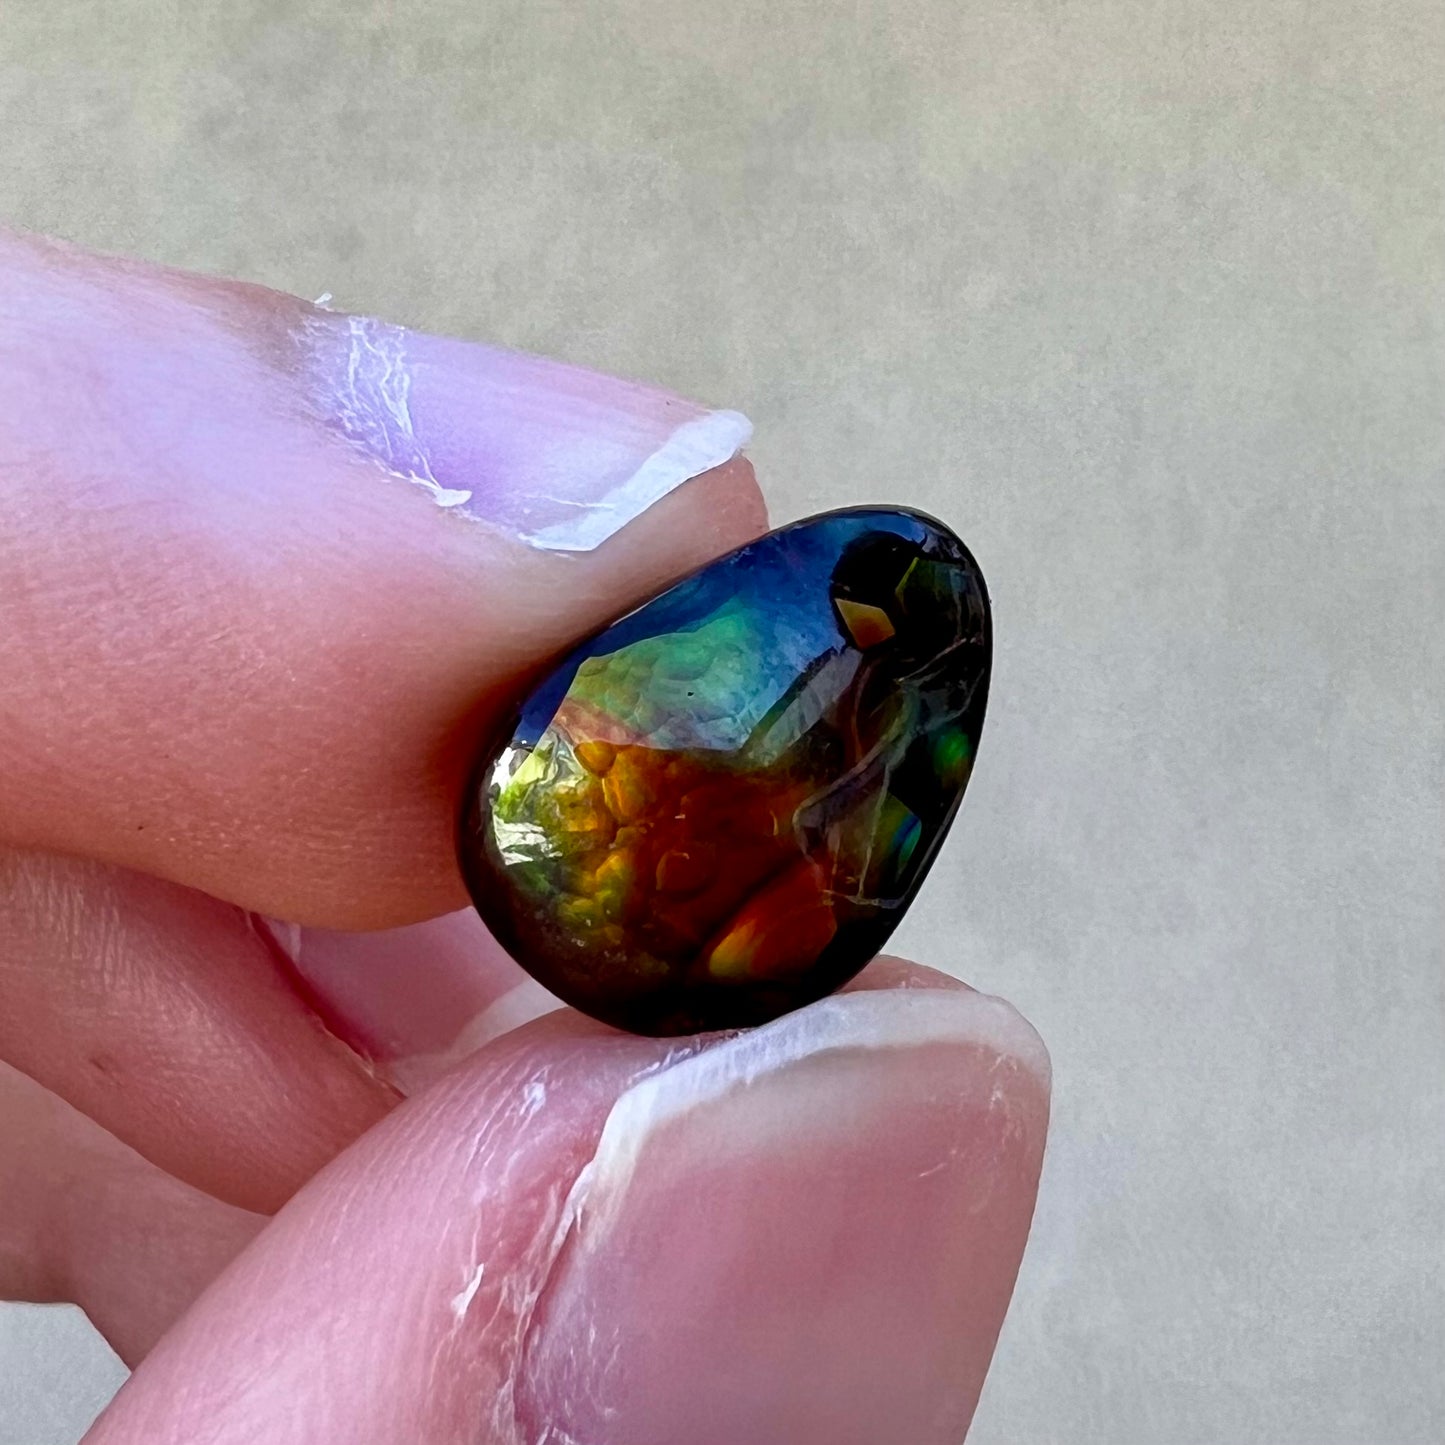 A loose, pear shaped fire agate stone from Northern Mexico.  The stone is red and green with blue banding.